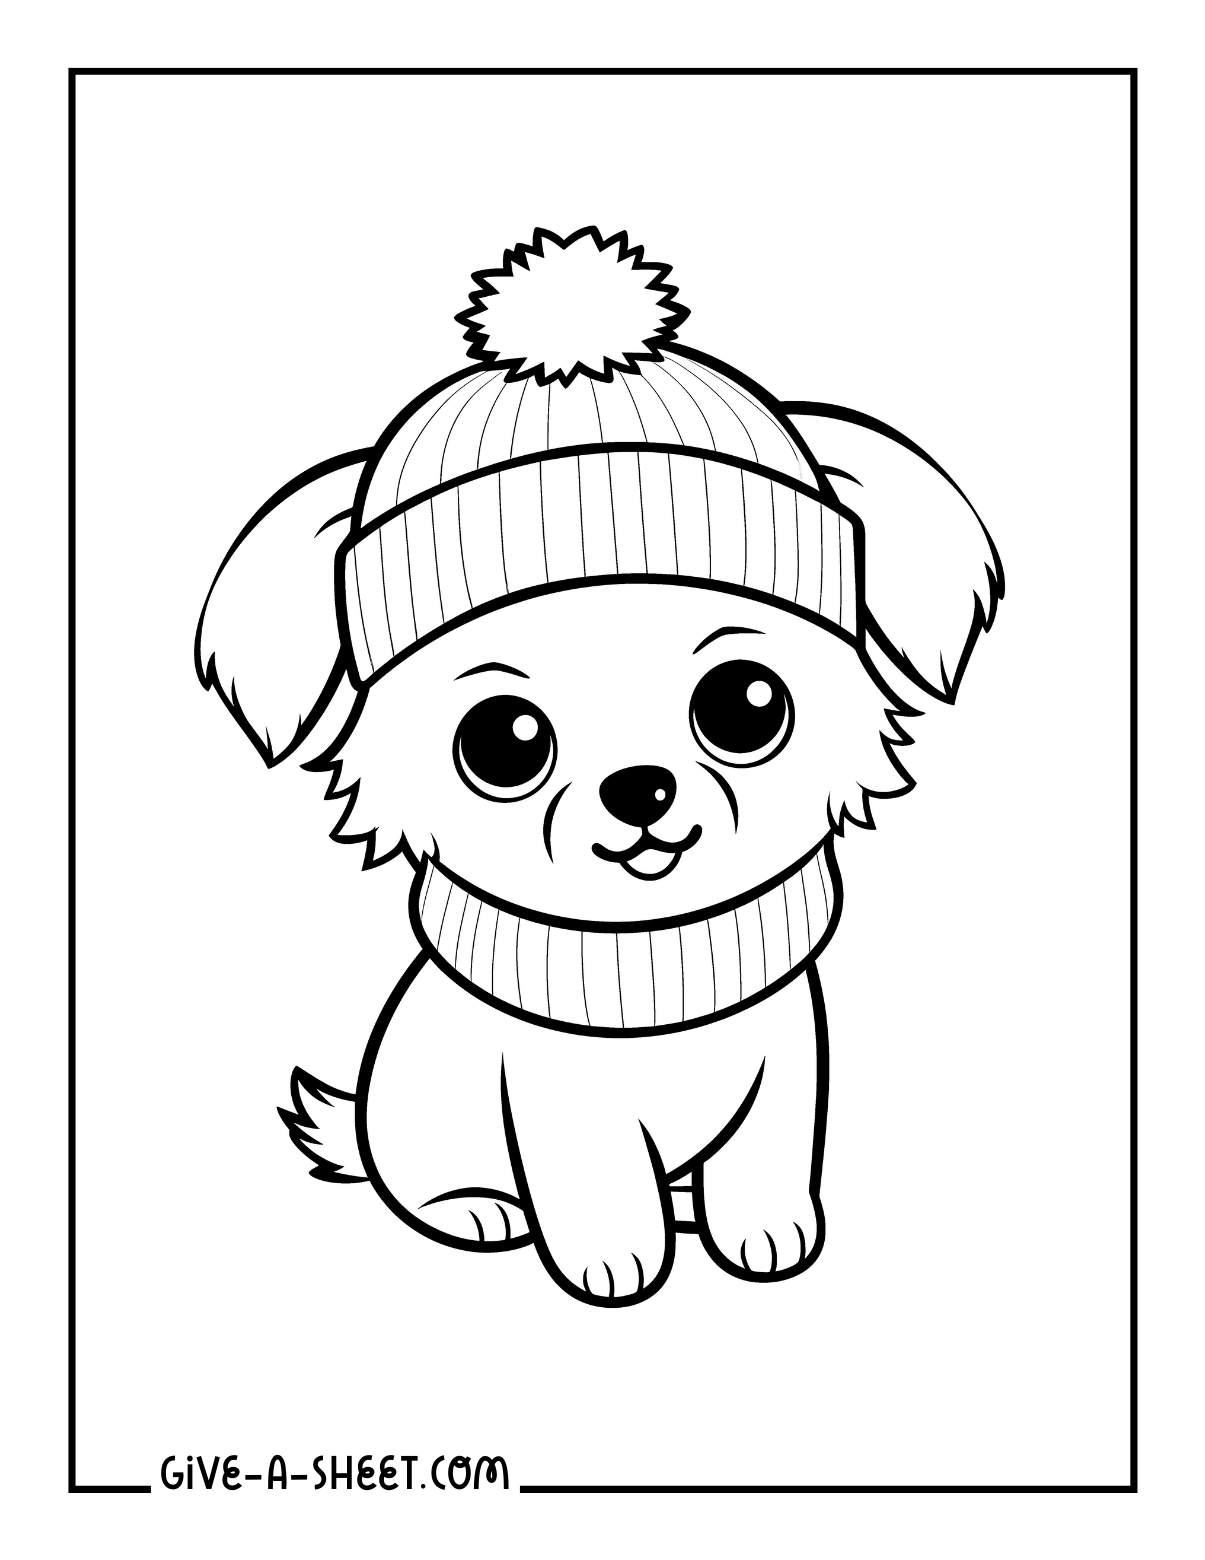 Puppy wearing cozy hat coloring page for kids.